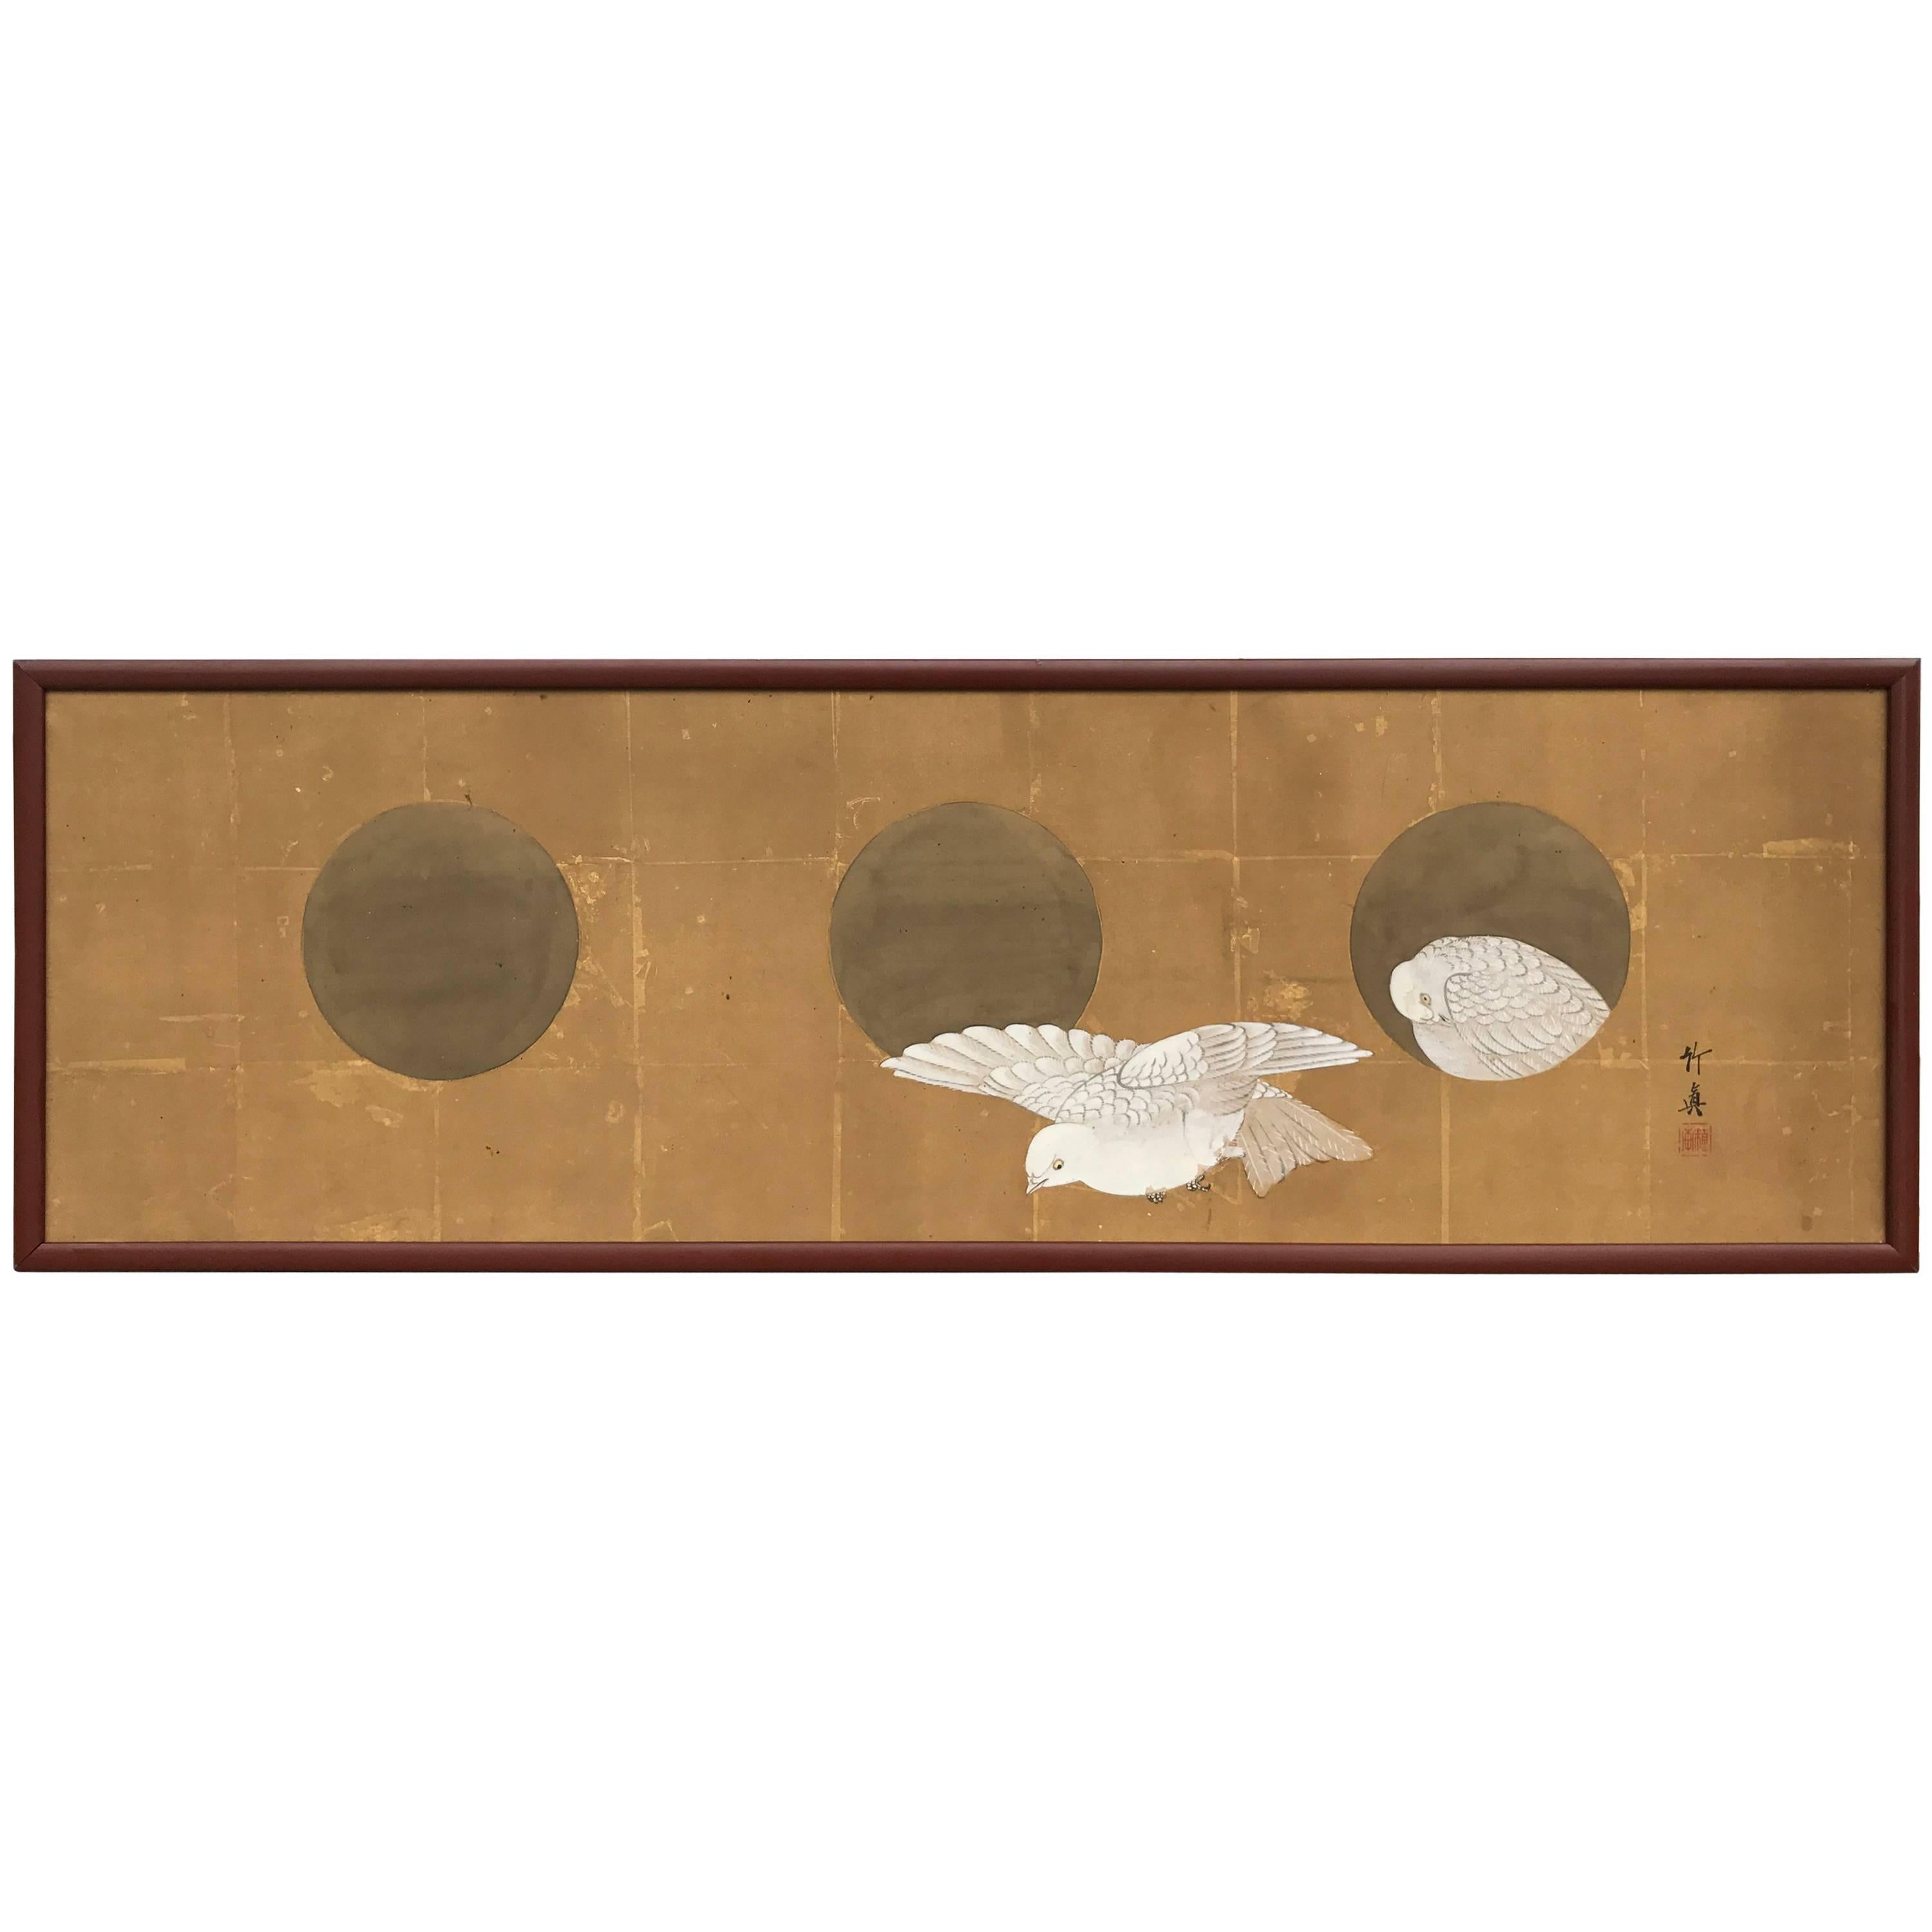 Japanese Antique Silk Painting Gaku White Nesting Doves and Moon Shapes Dwelling